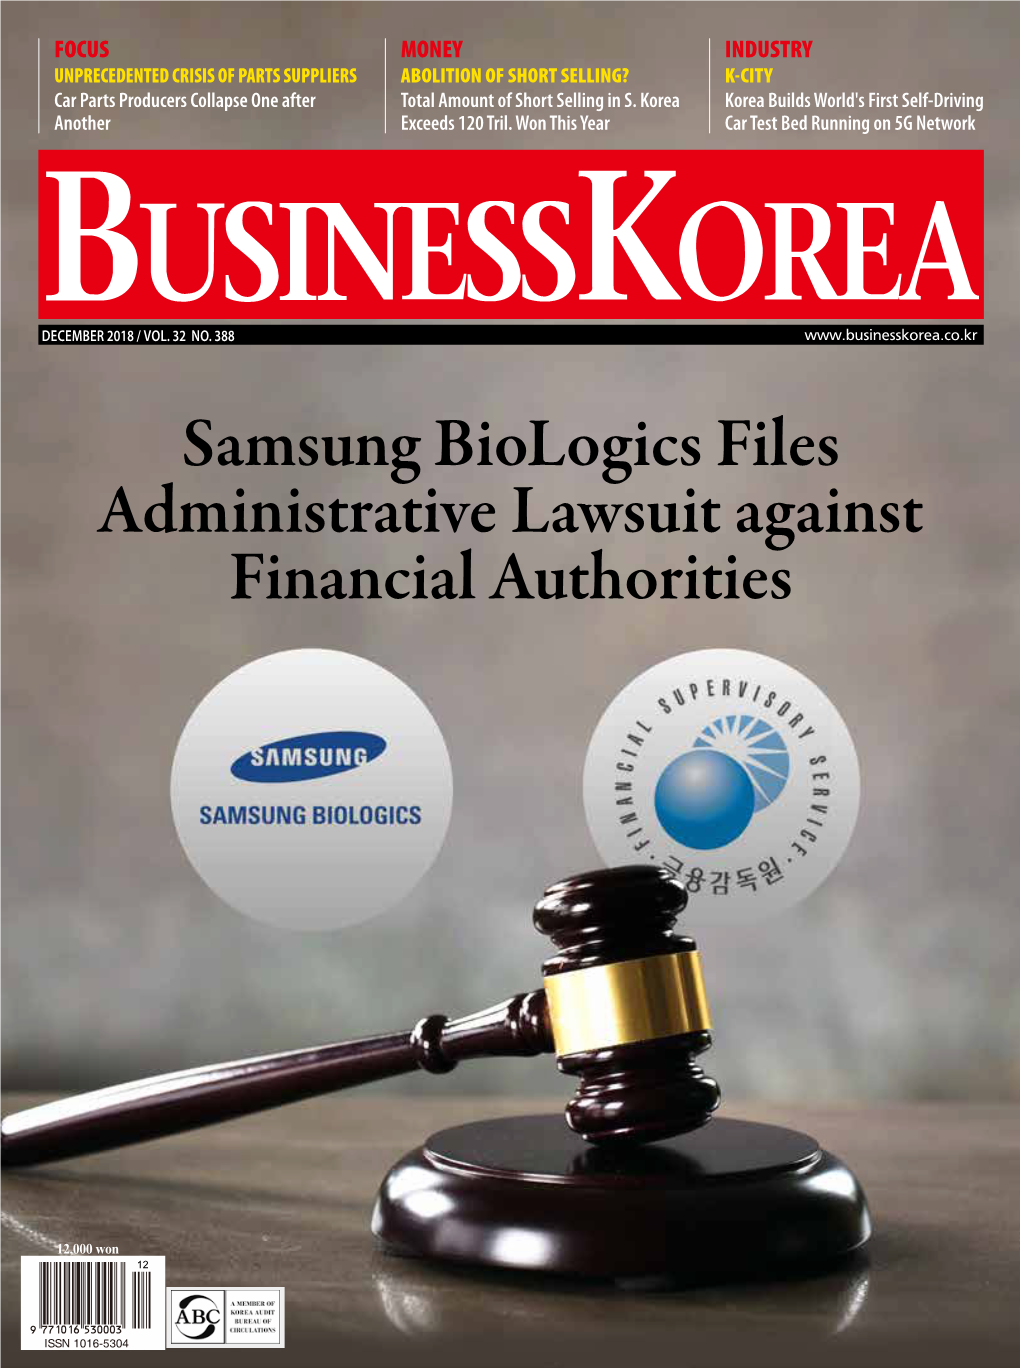 Samsung Biologics Files Administrative Lawsuit Against Financial Authorities